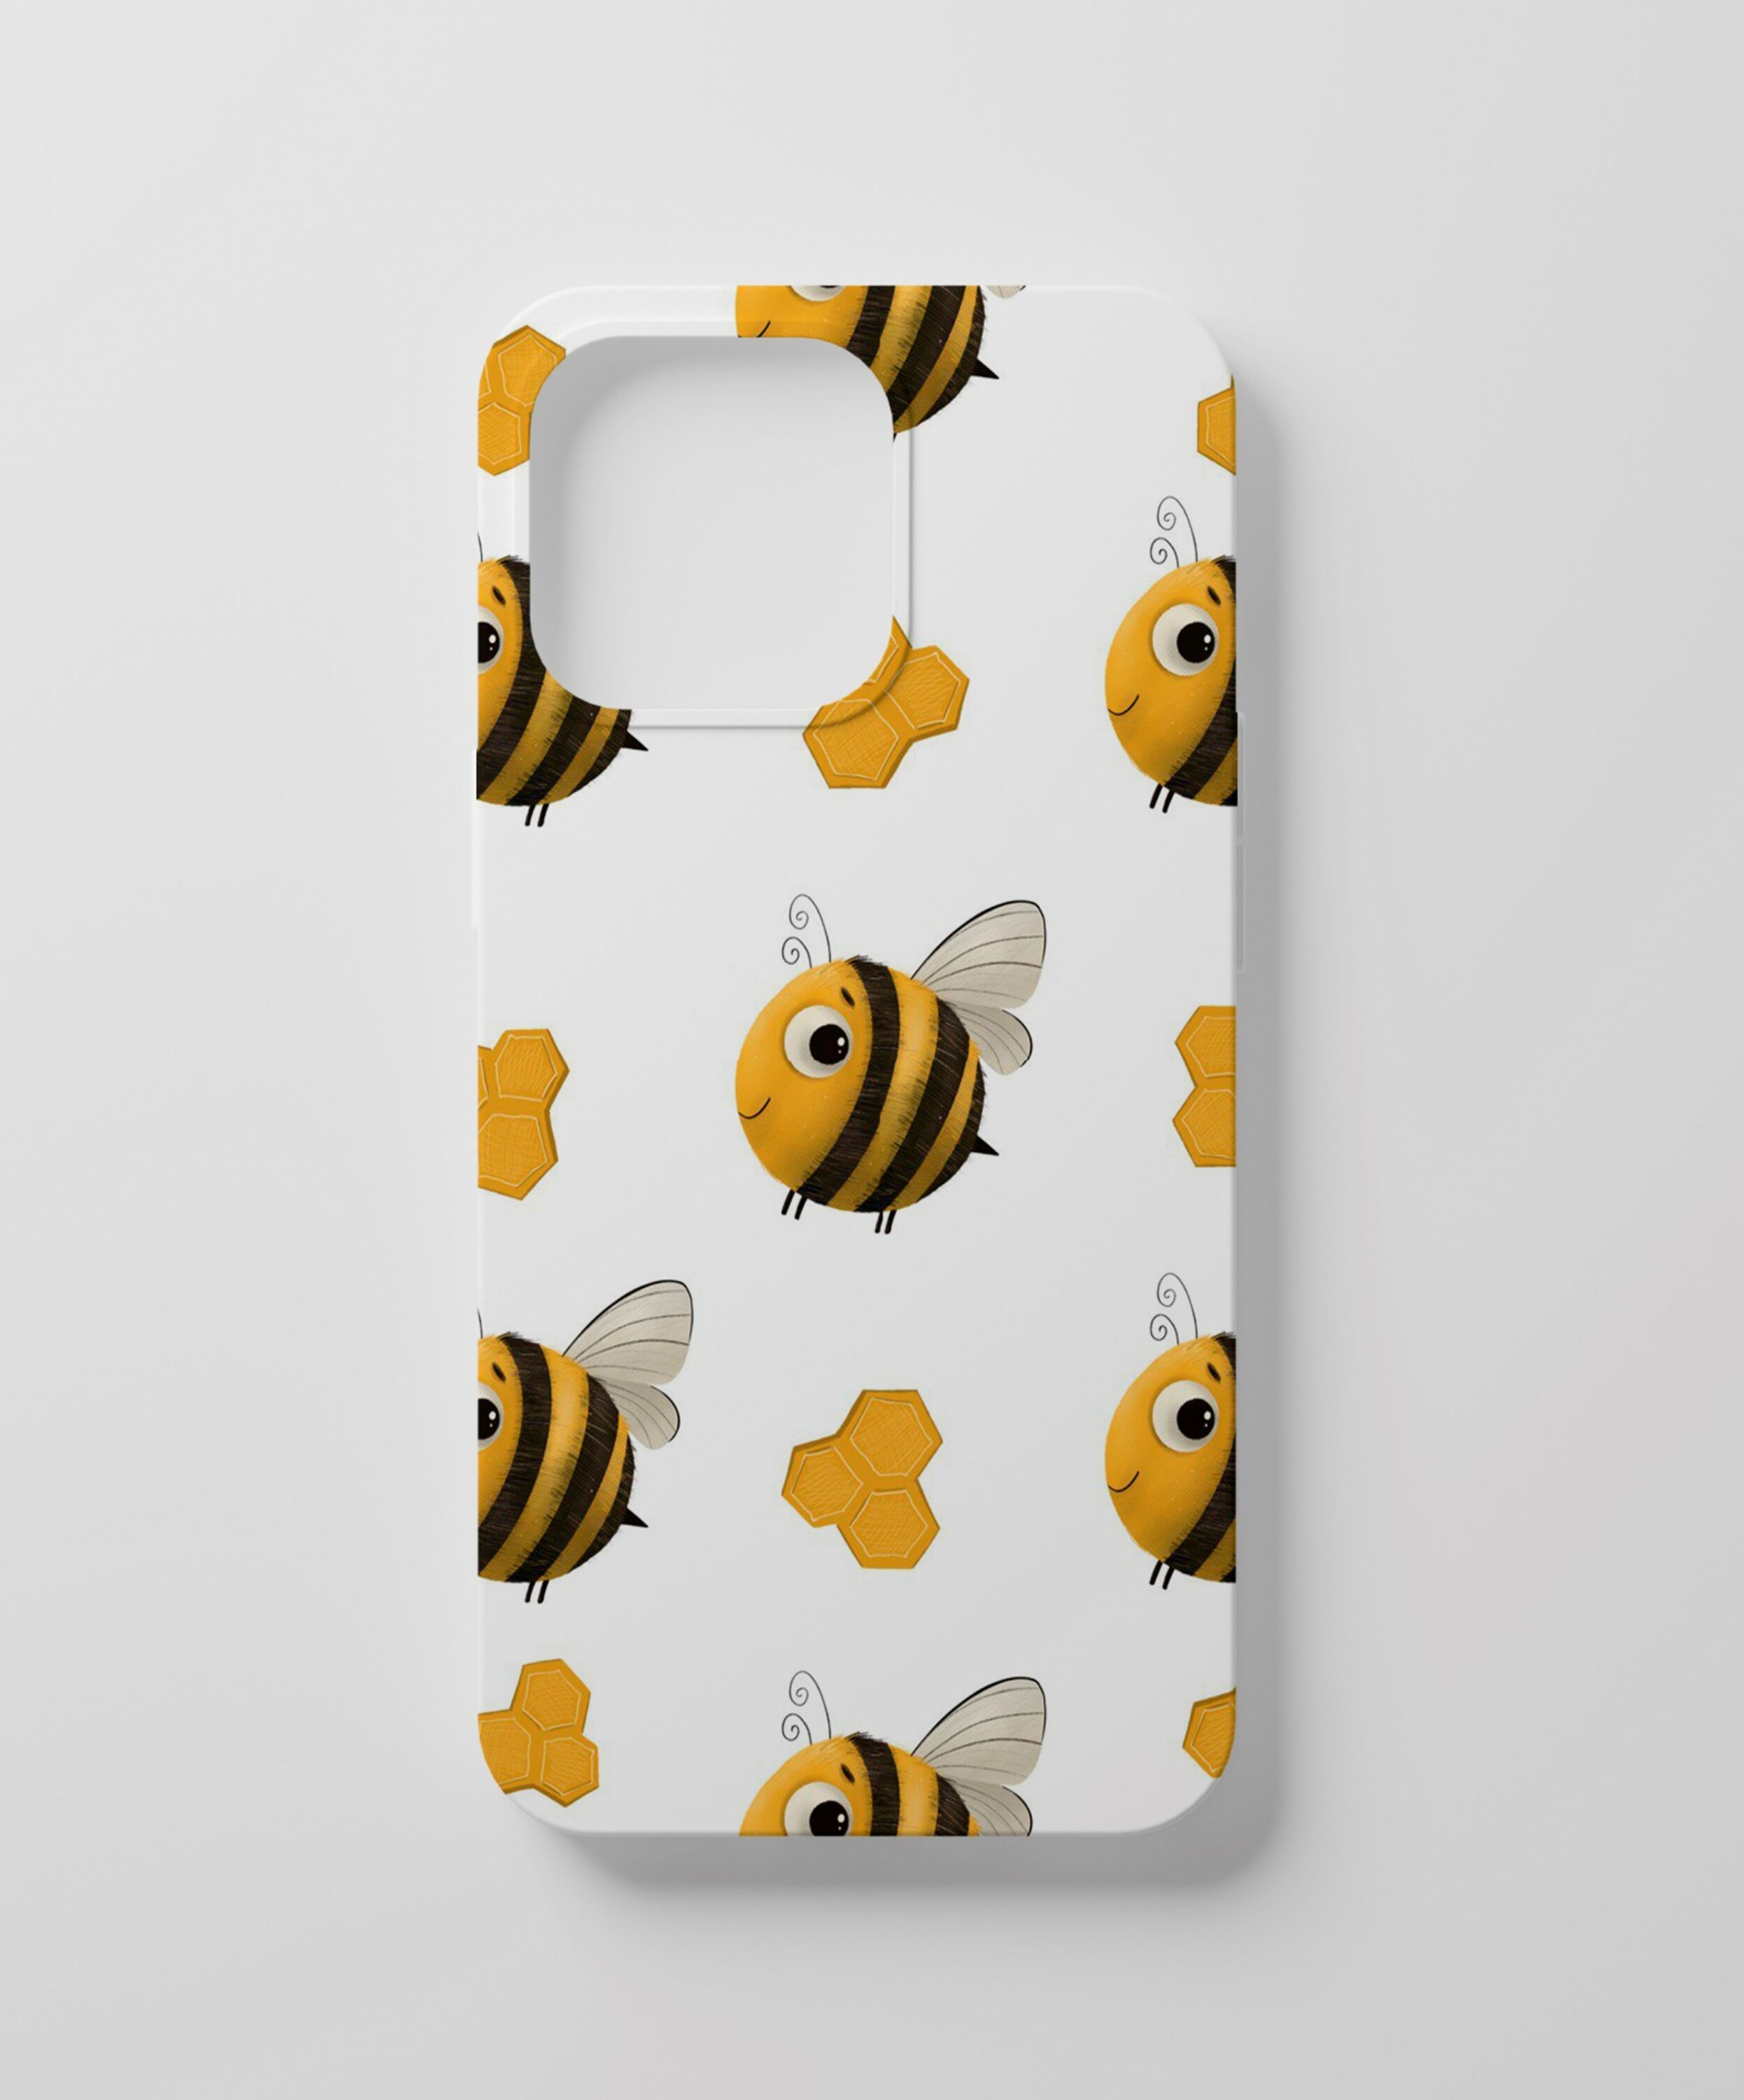 Bee and Honey Seamless Patterns.